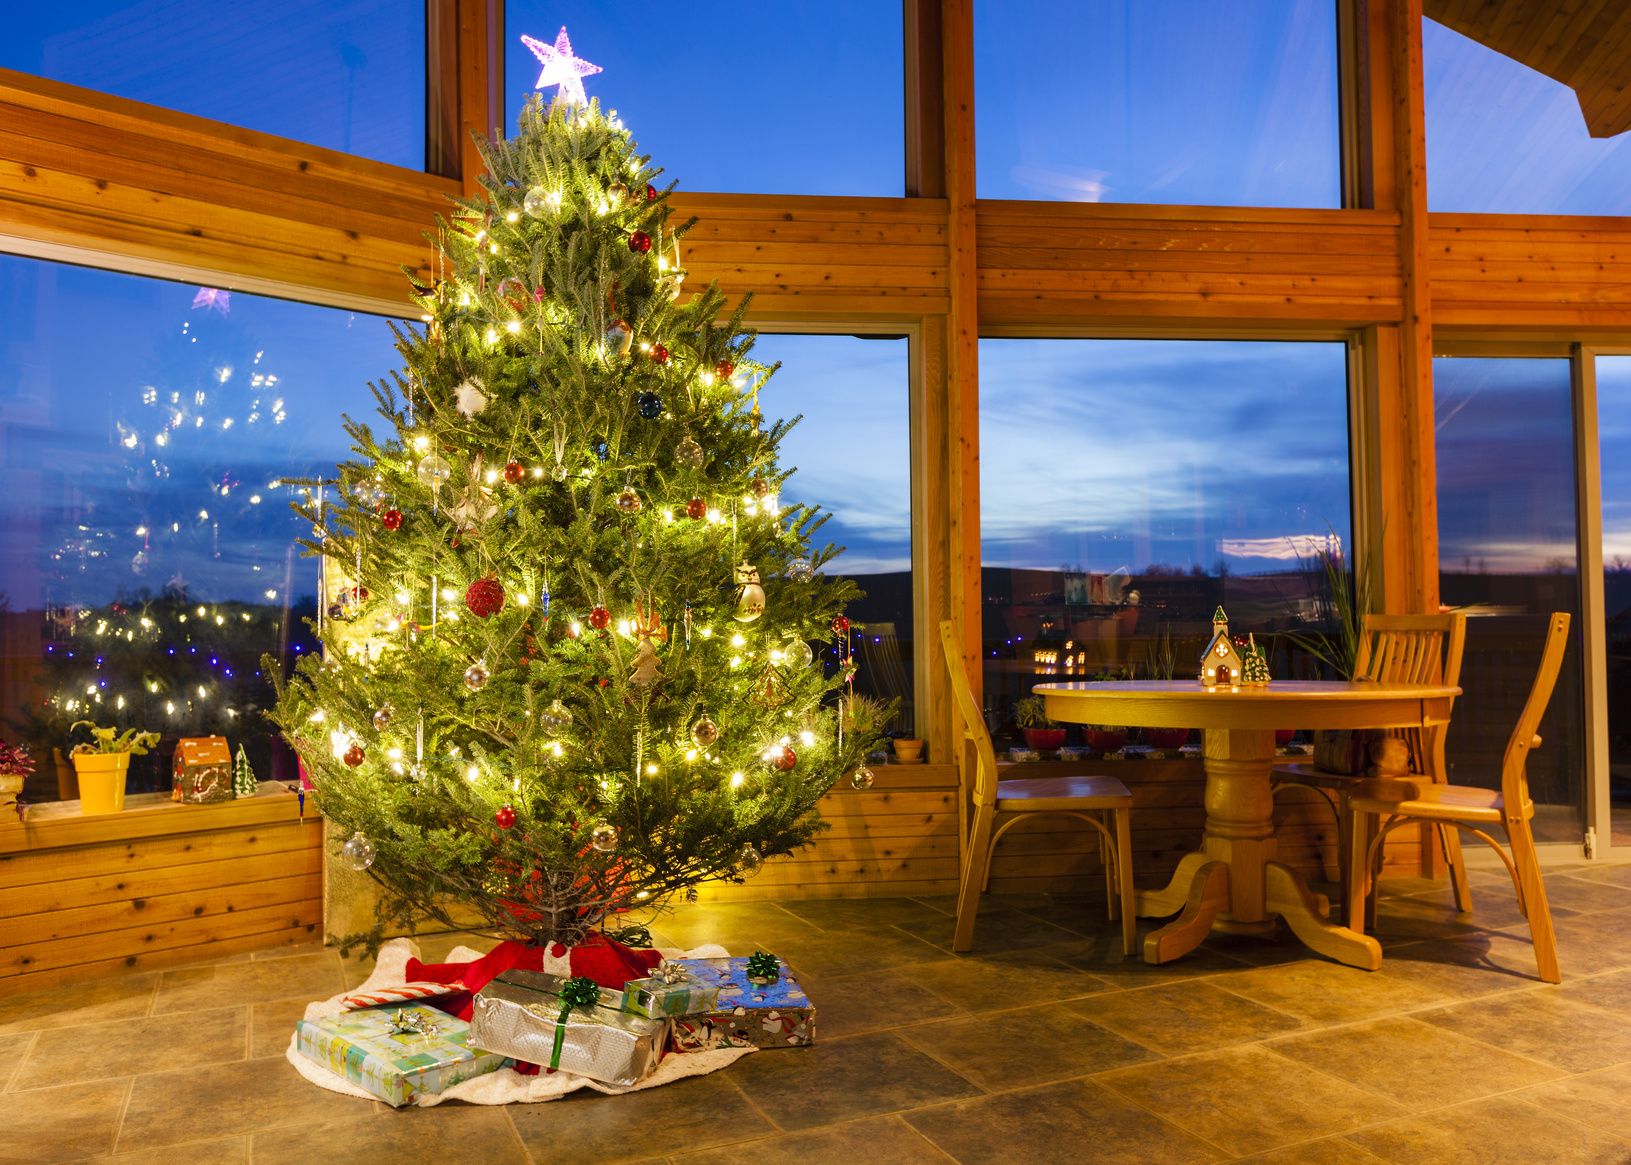 Christmas tree in modern home